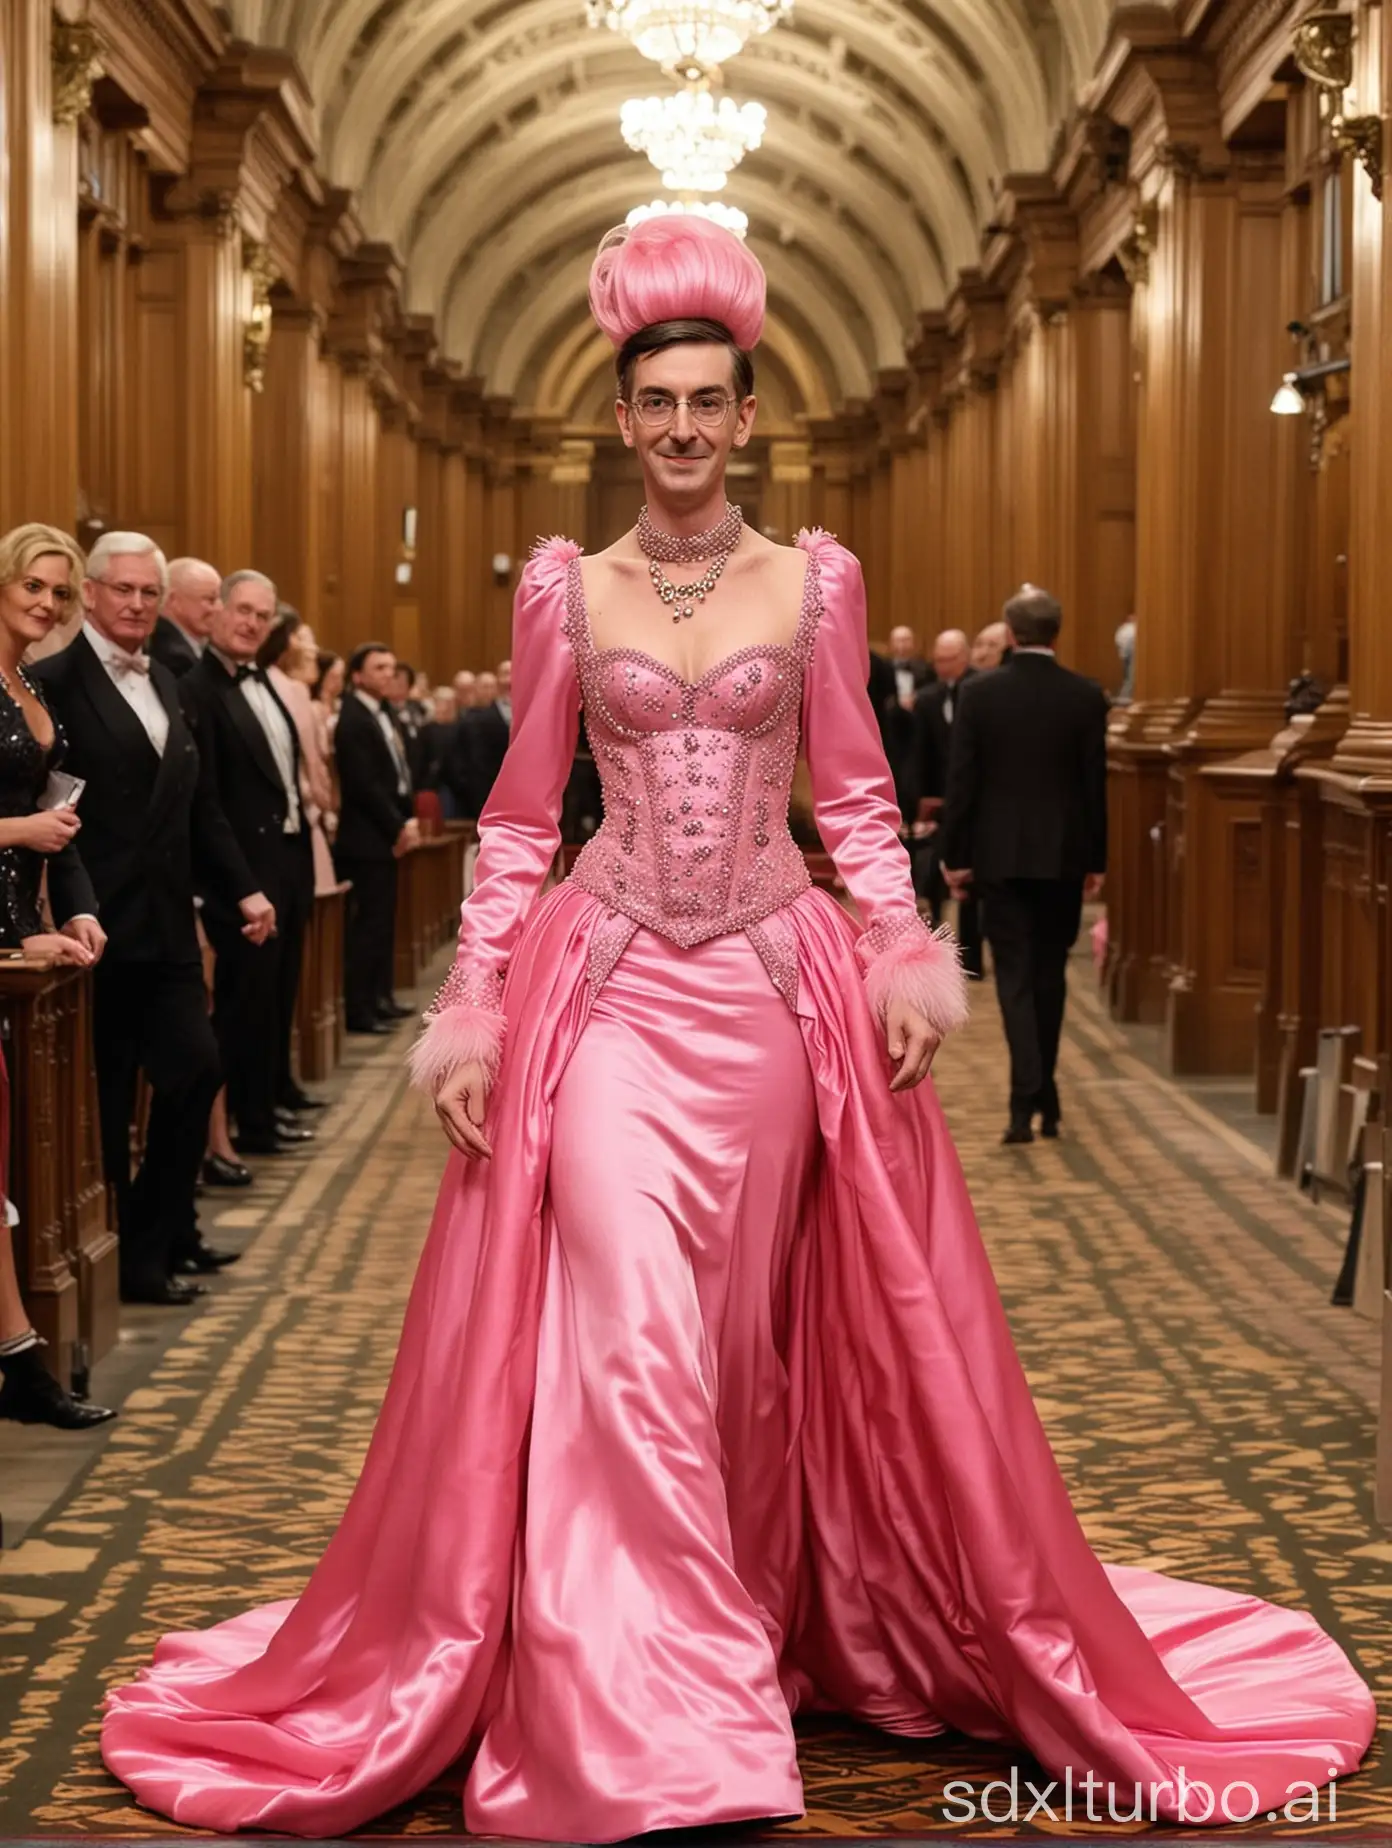 British politician Jacob Rees-Mogg as a flamboyant drag queen in a pink satin ballroom gown, catwalk through the hall of Parliament